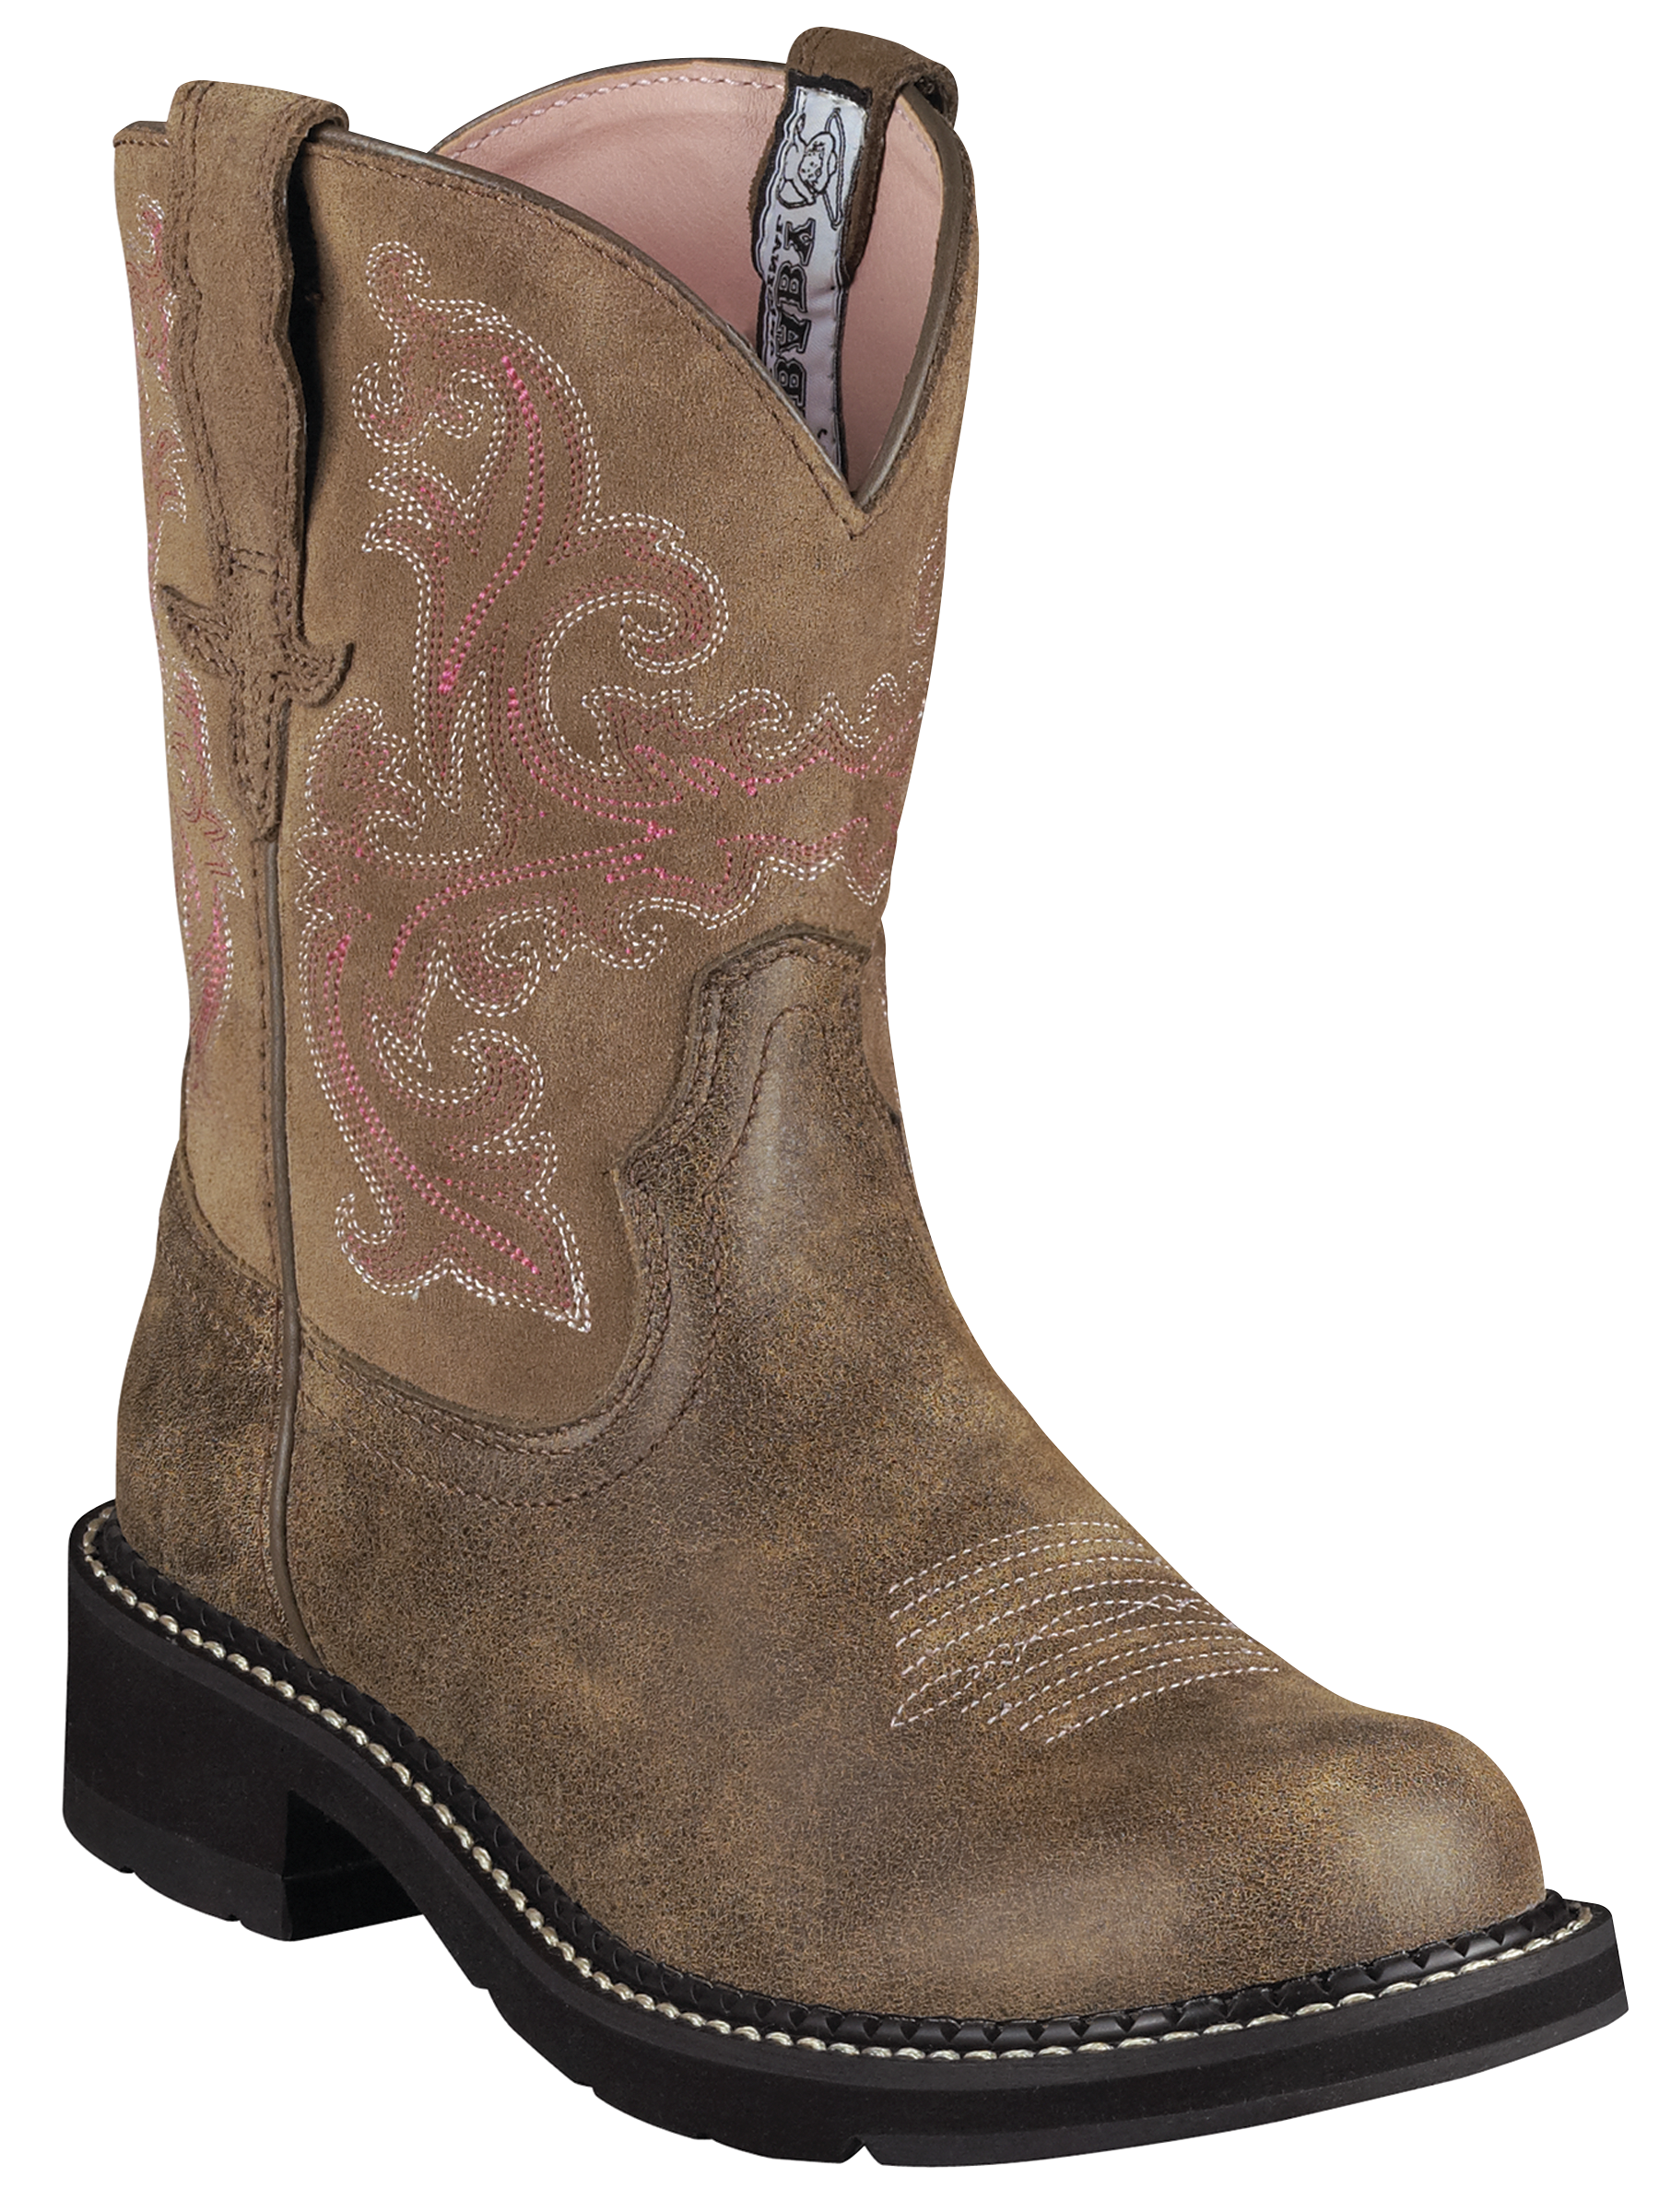 Ariat Fatbaby II Western Boots for Ladies